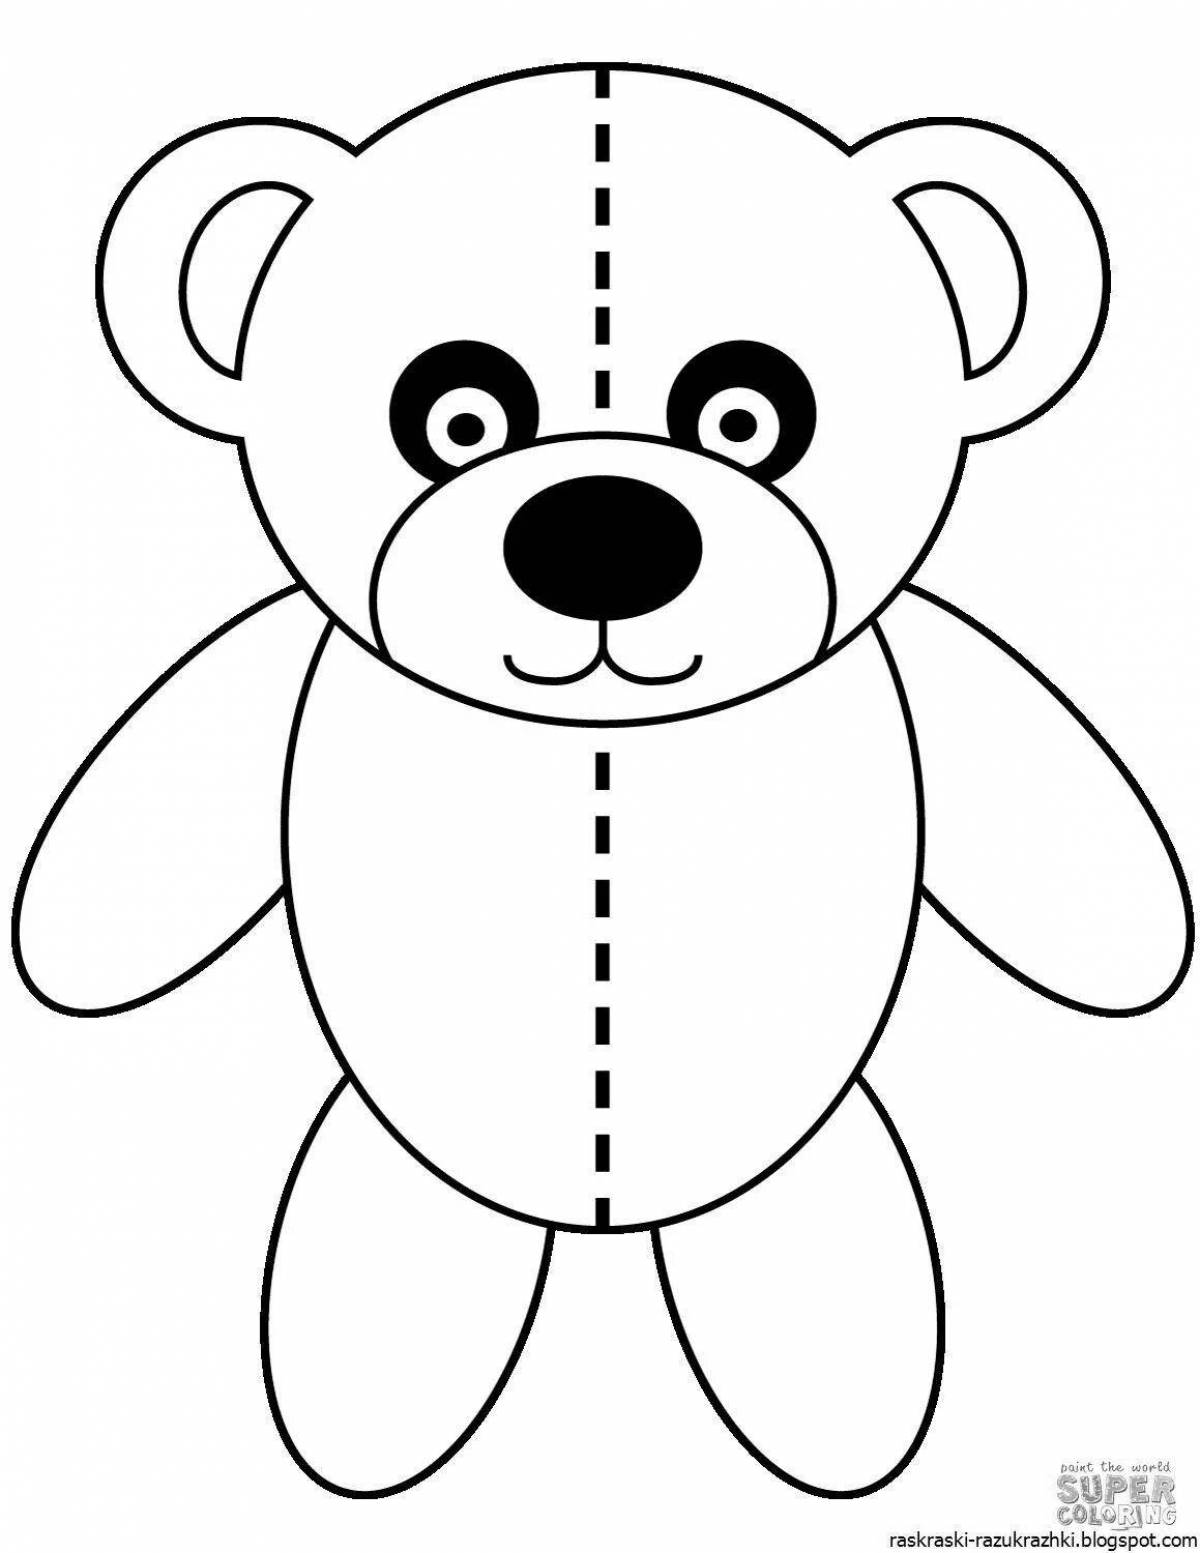 Gorgeous teddy bear coloring book